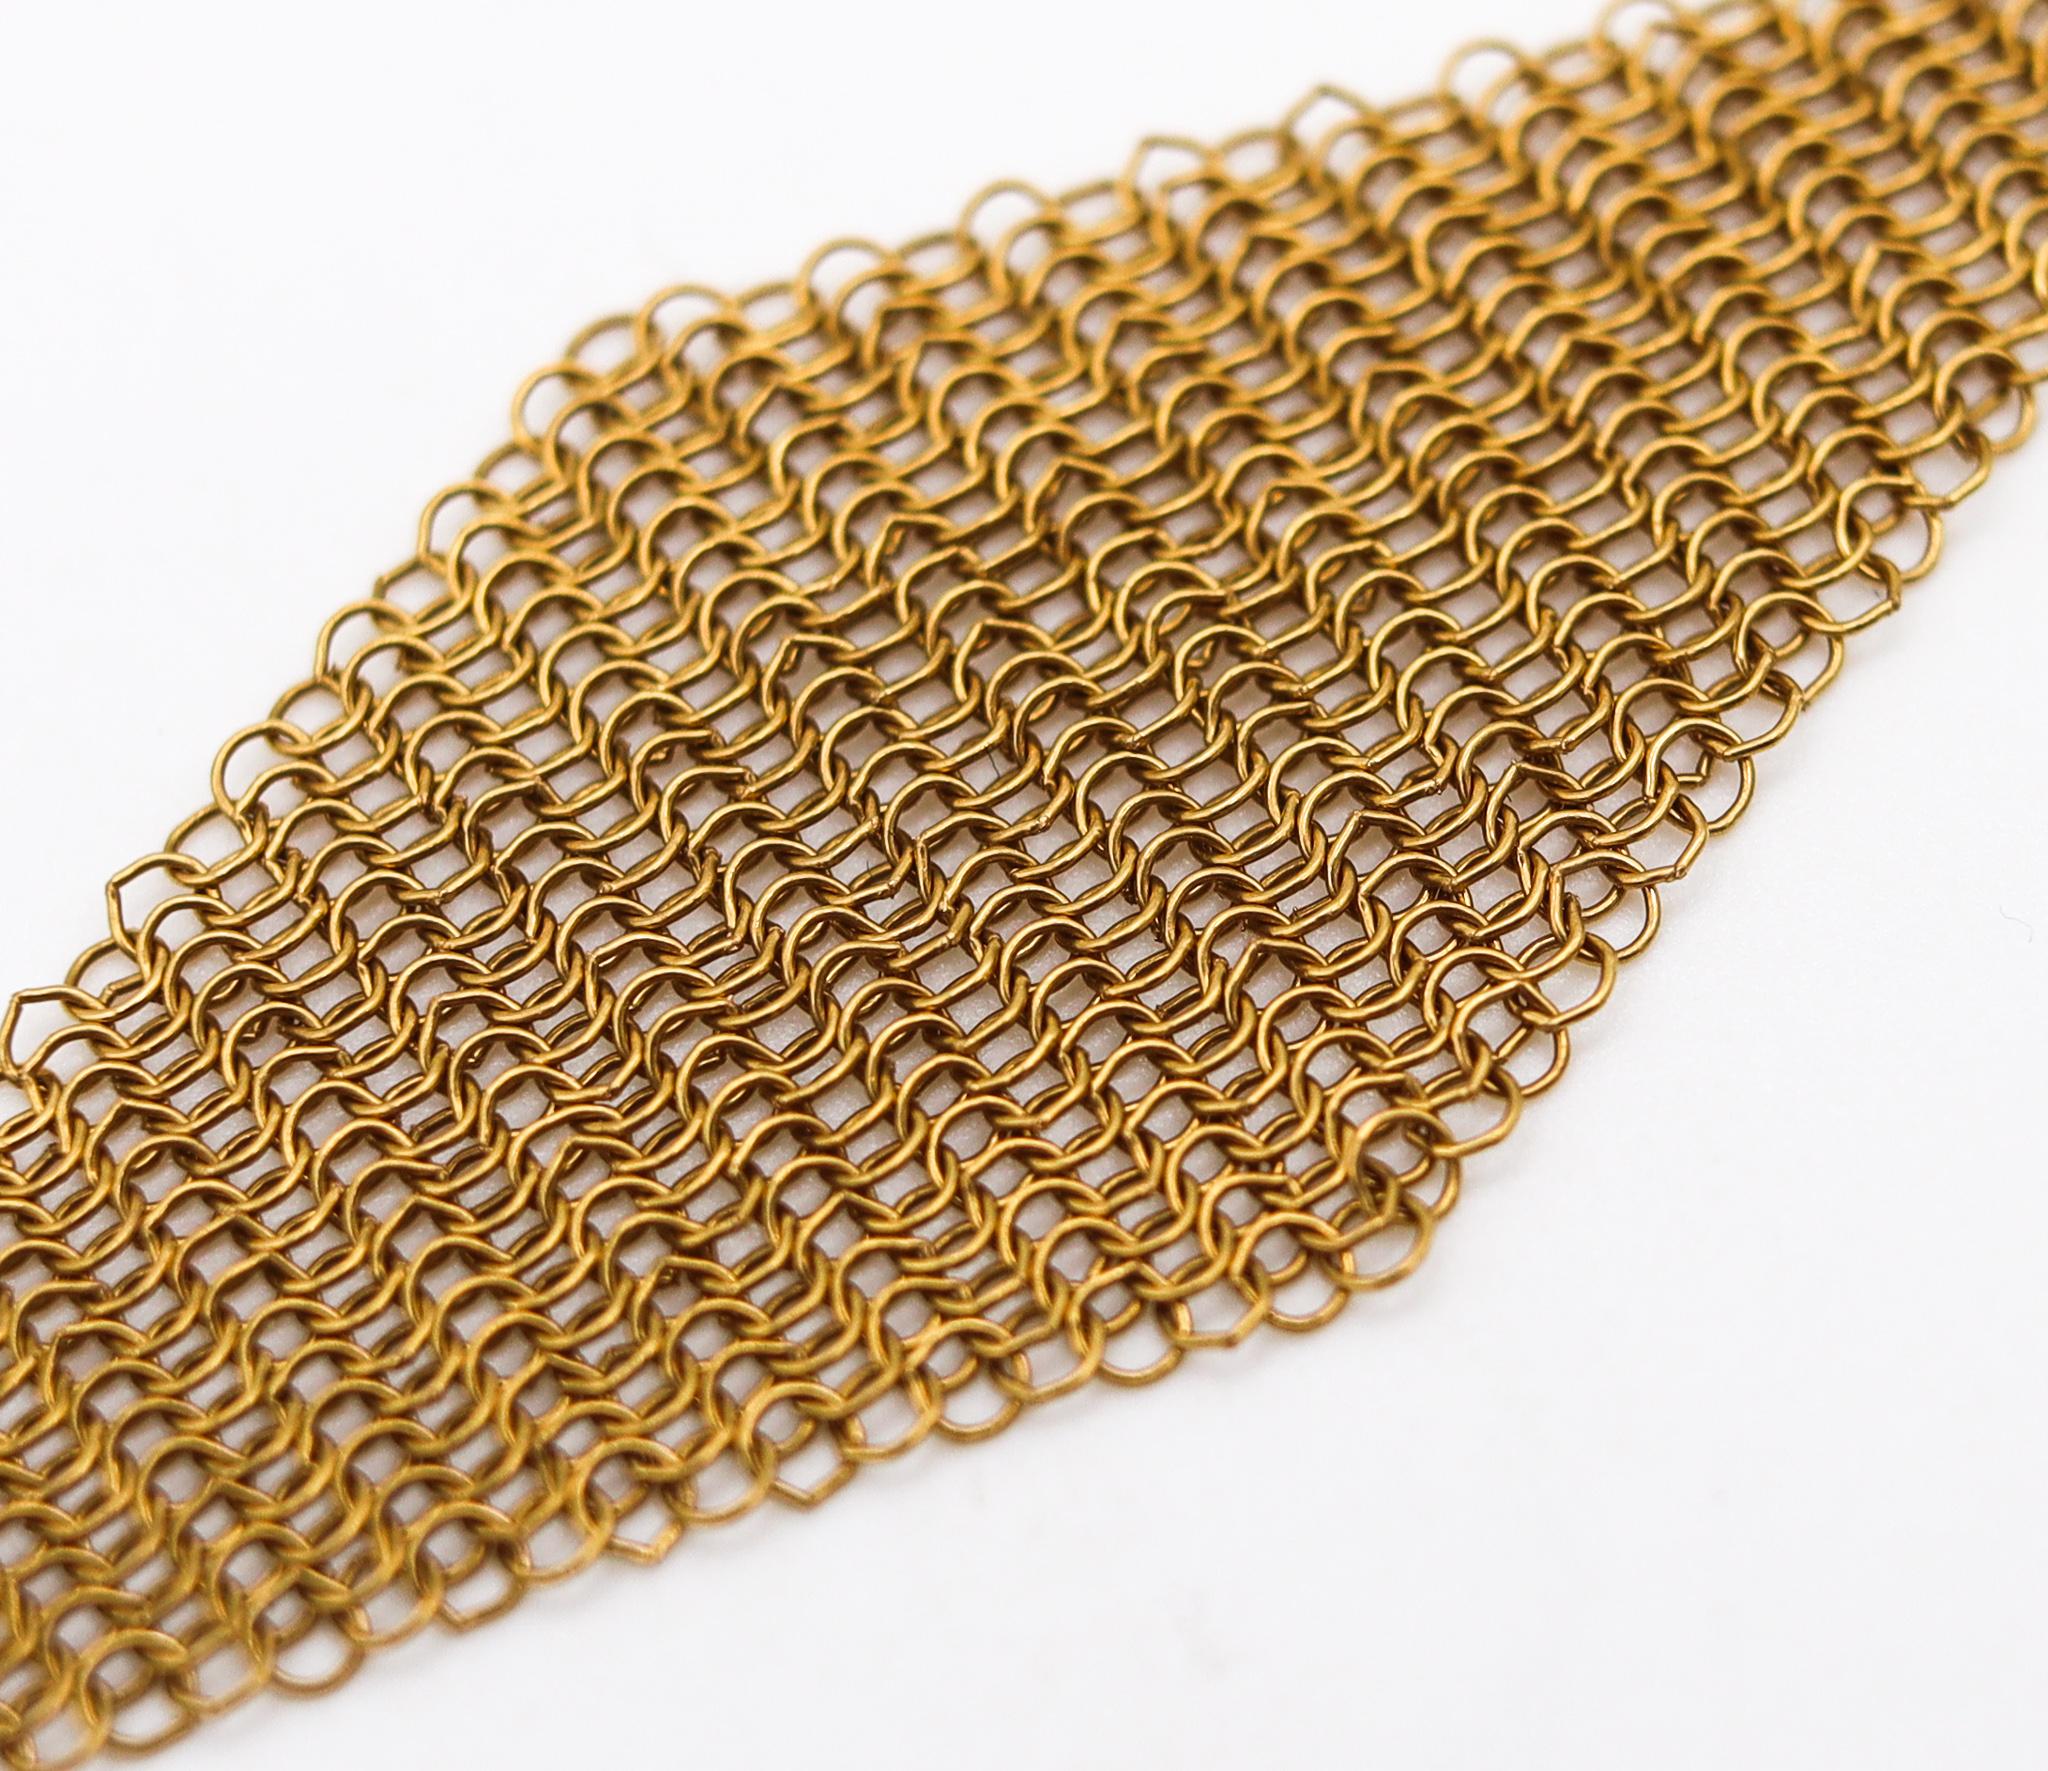 Tiffany & Co. 1981 By Elsa Peretti Drop Mesh Earrings In 18Kt Yellow Gold In Excellent Condition For Sale In Miami, FL